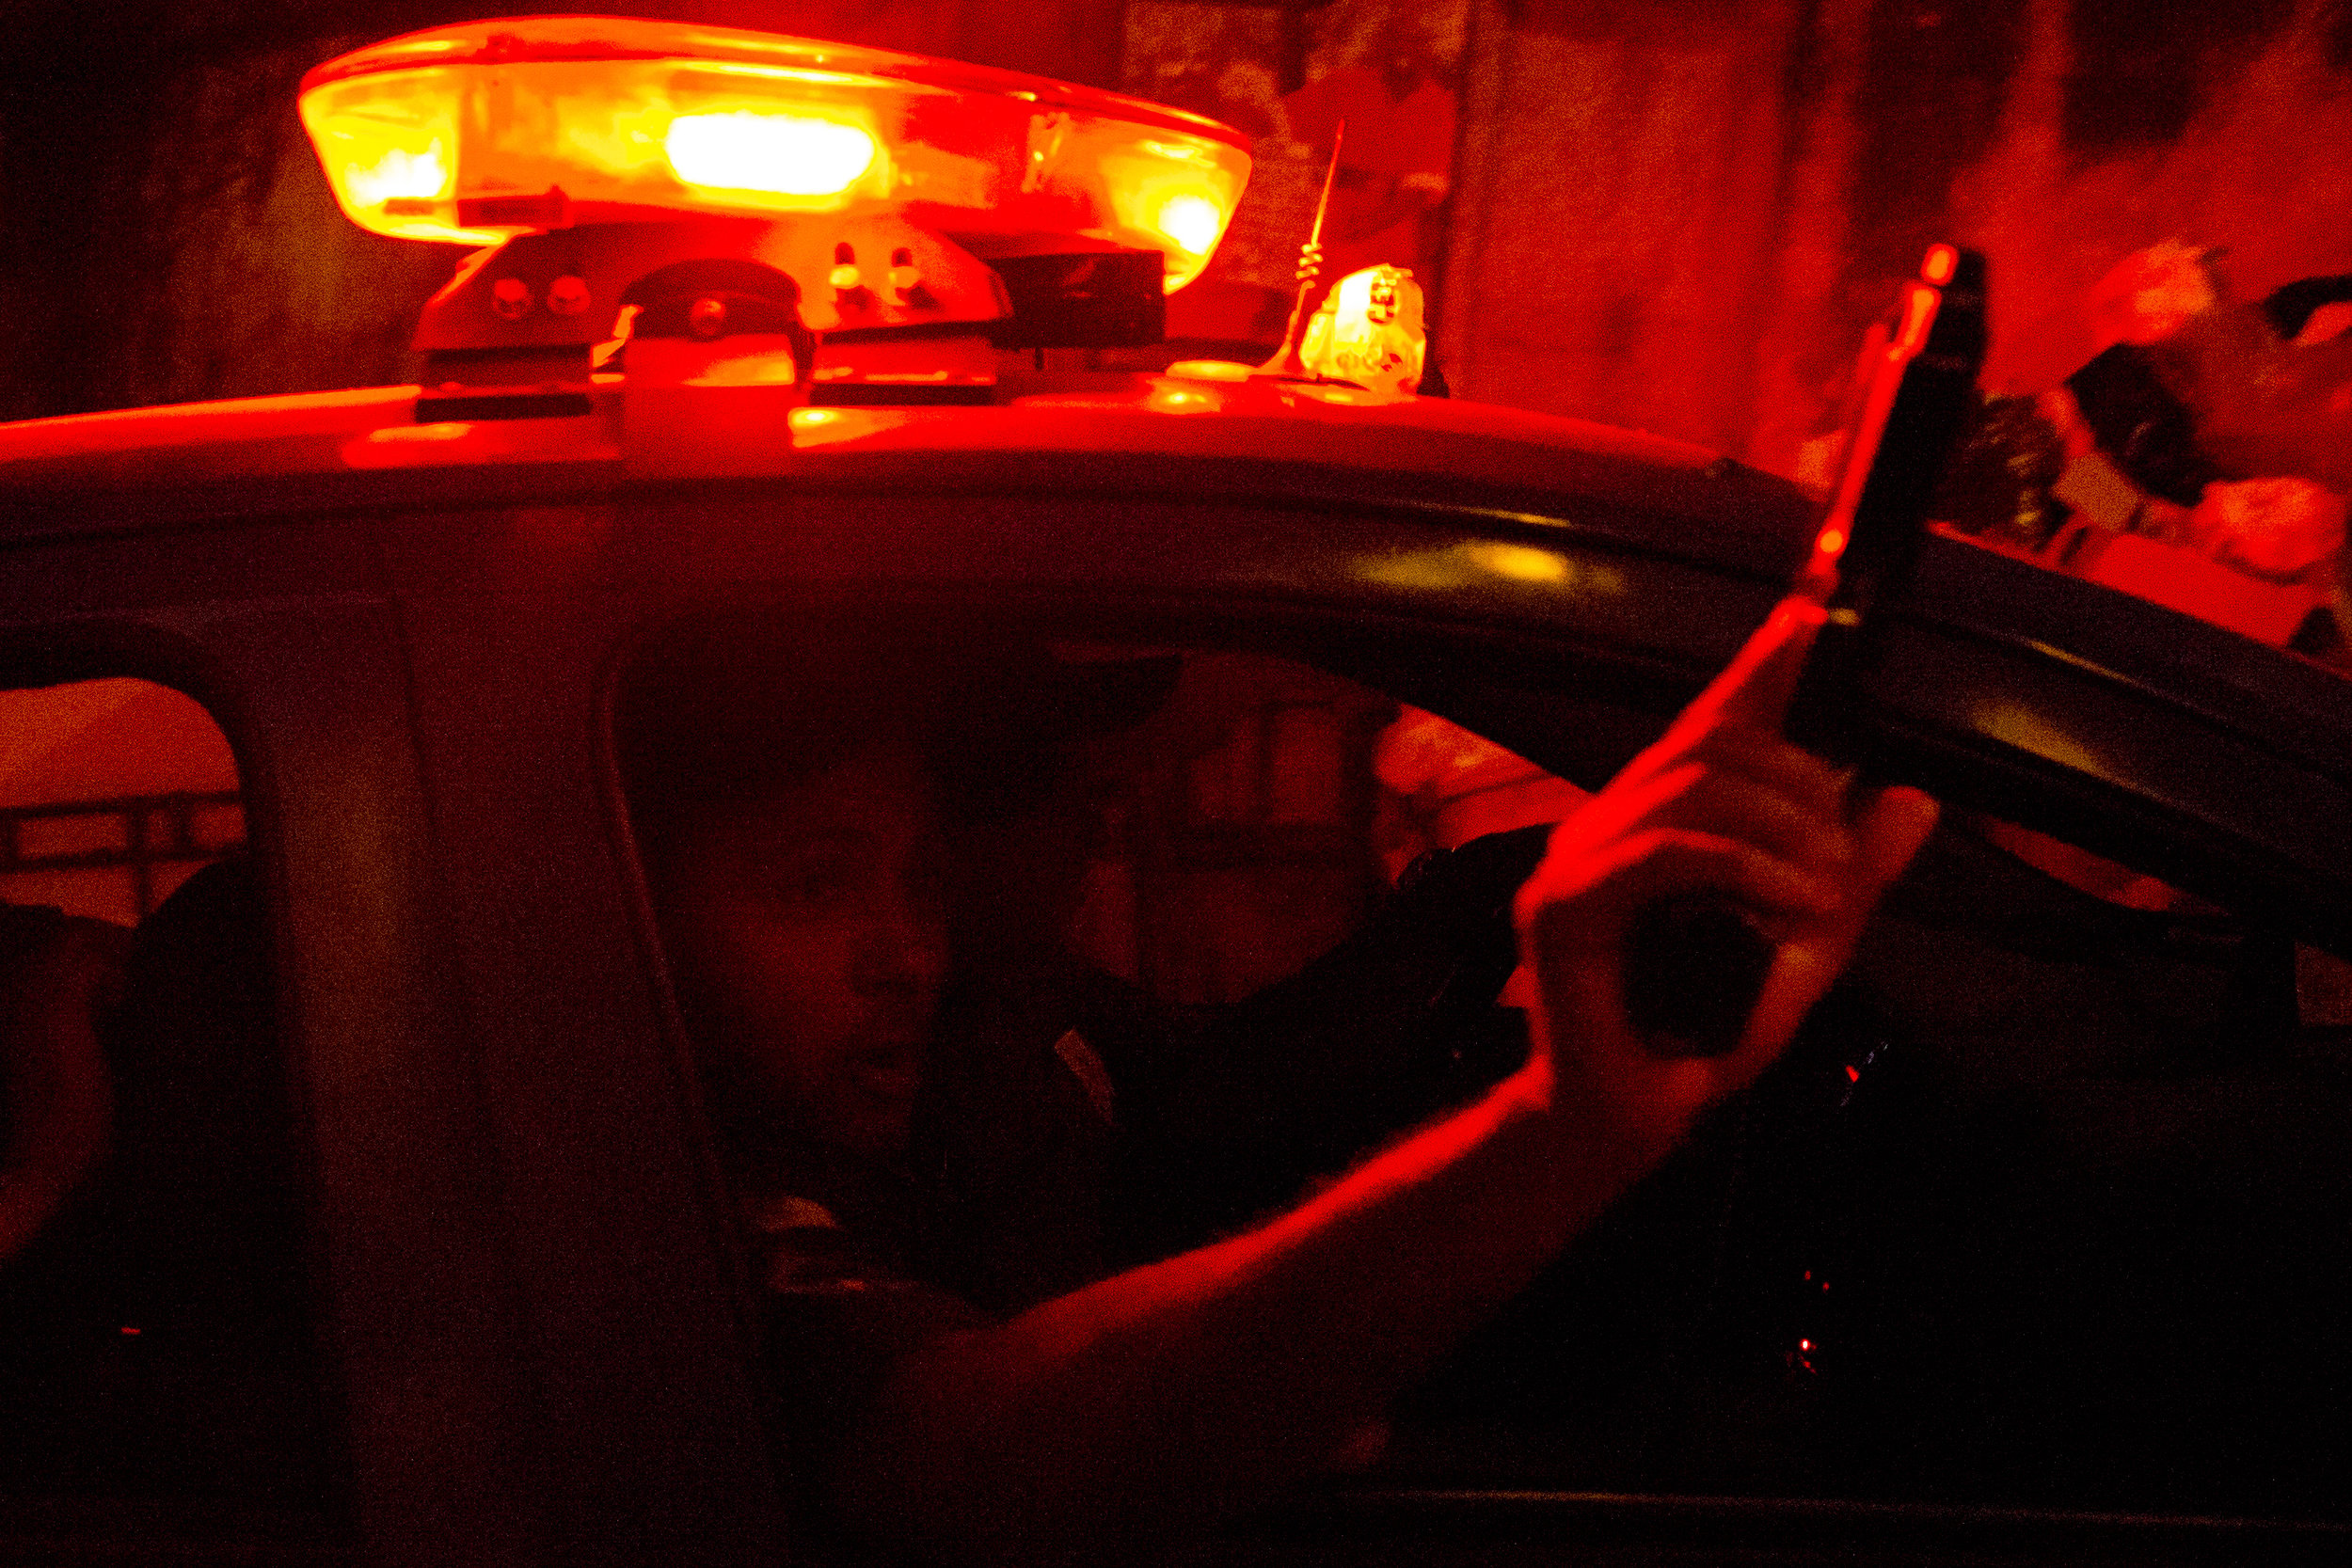  A Rio de Janeiro military police officer waves his gun out of the car while driving down the street after a protest in which police intervened. (Courtney Pedroza/Cronkite News)  &nbsp; 